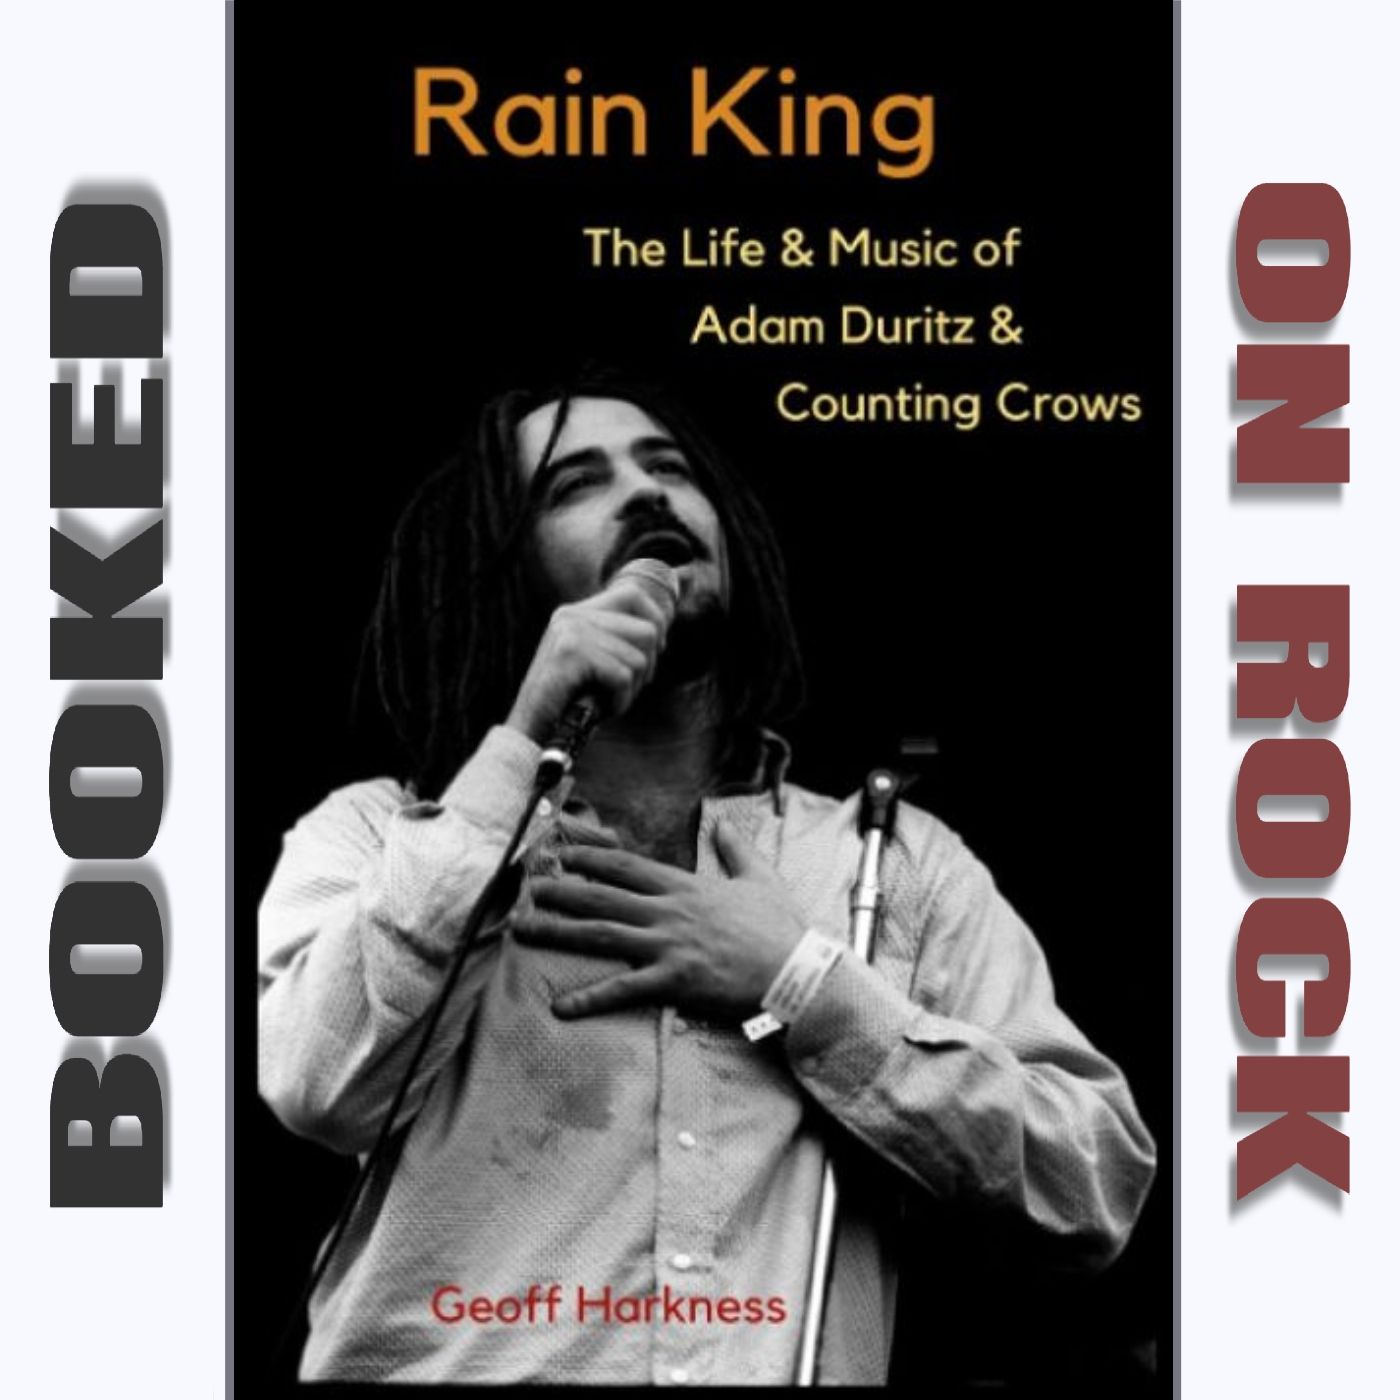 ”Rain King: The Life and Music of Adam Duritz and Counting Crows”/Geoff Harkness [Episode 156]